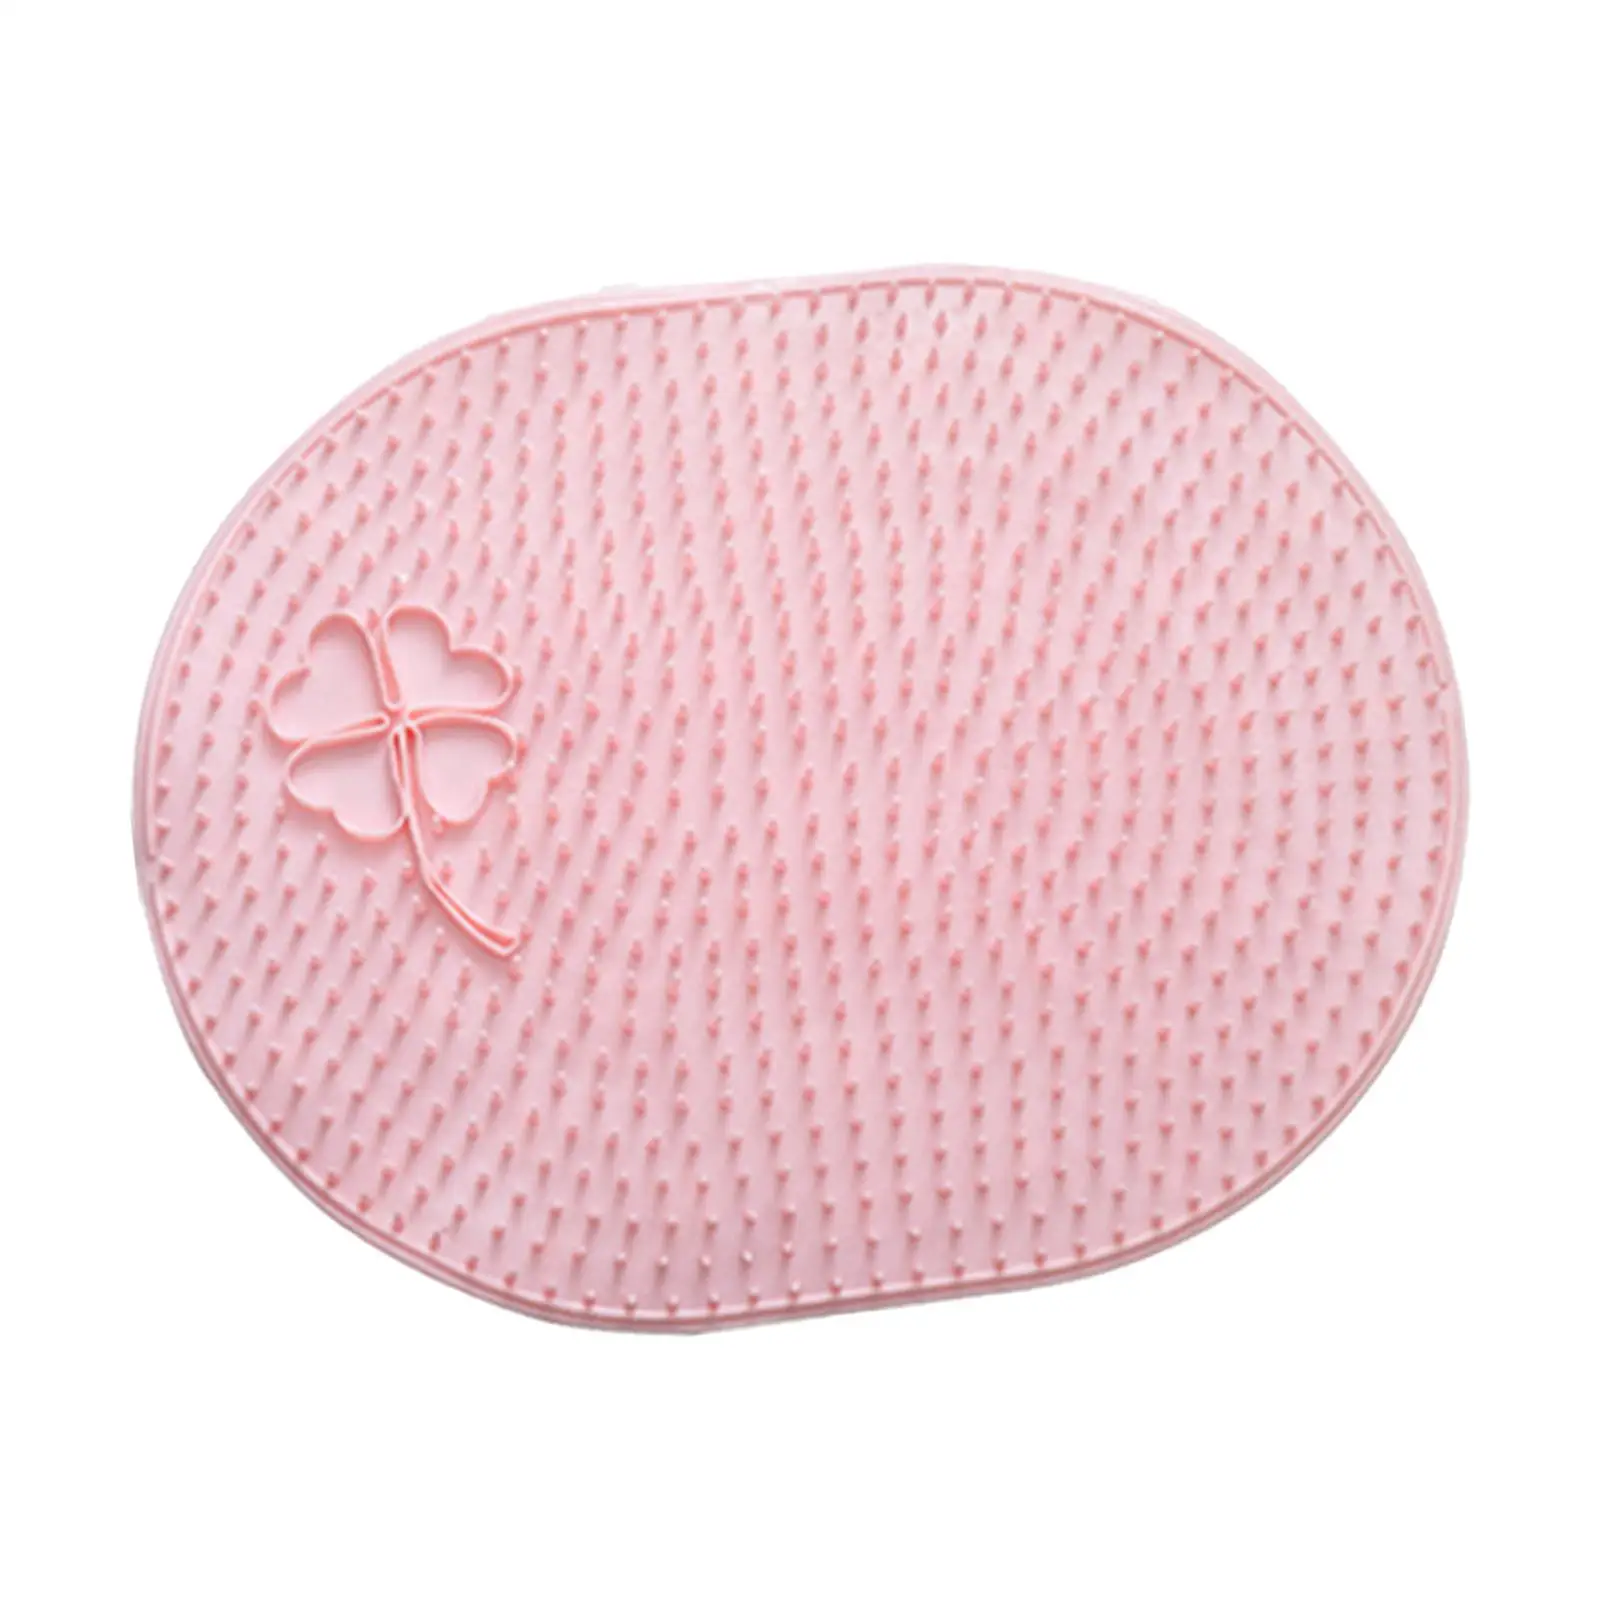 Silicone Shower Foot Scrubber Pad Pink with Suction Cup Accessory Without Bending Over Easily Clean Durable Comfortable